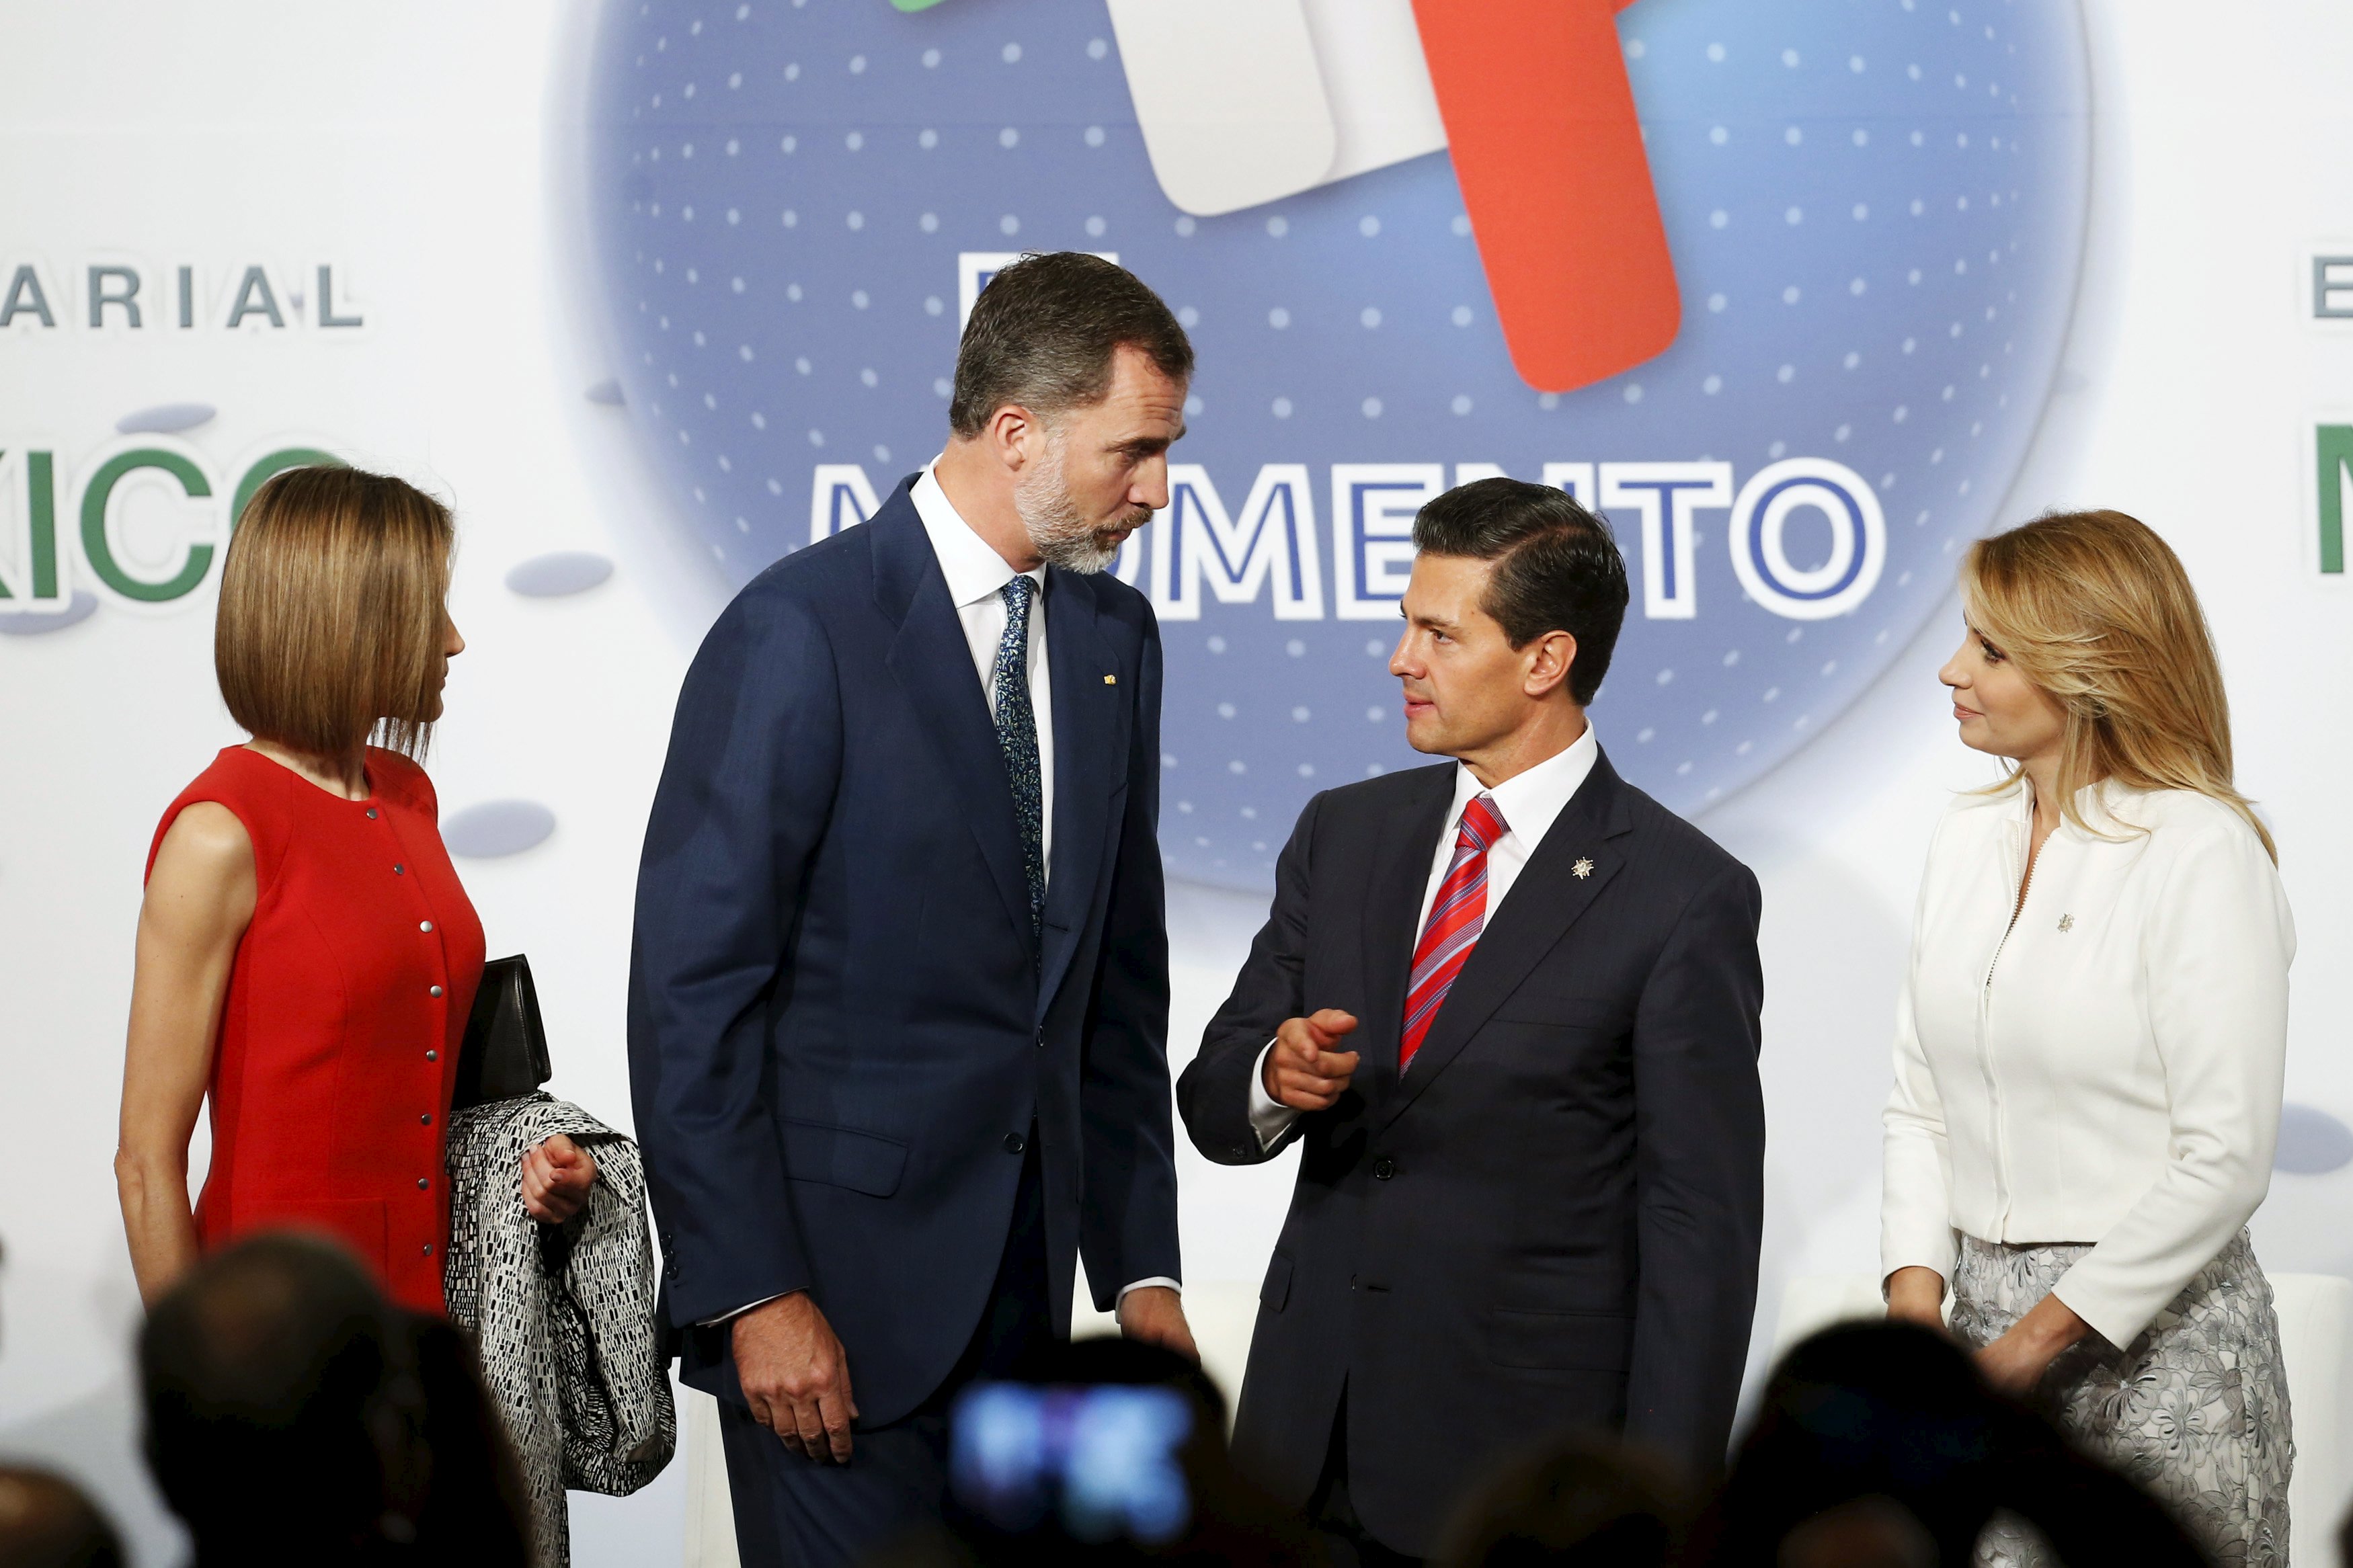 Spain's King Felipe (2nd L) speaks with Mexico's President Enrique Pena Nieto (2nd R) as Spain's Queen Letizia (L) and Mexico's First Lady Angelica Rivera (R) watch, during the "Business Meeting Espana-Mexico" in Mexico City, Mexico, June 30, 2015. REUTERS/Edgard Garrido